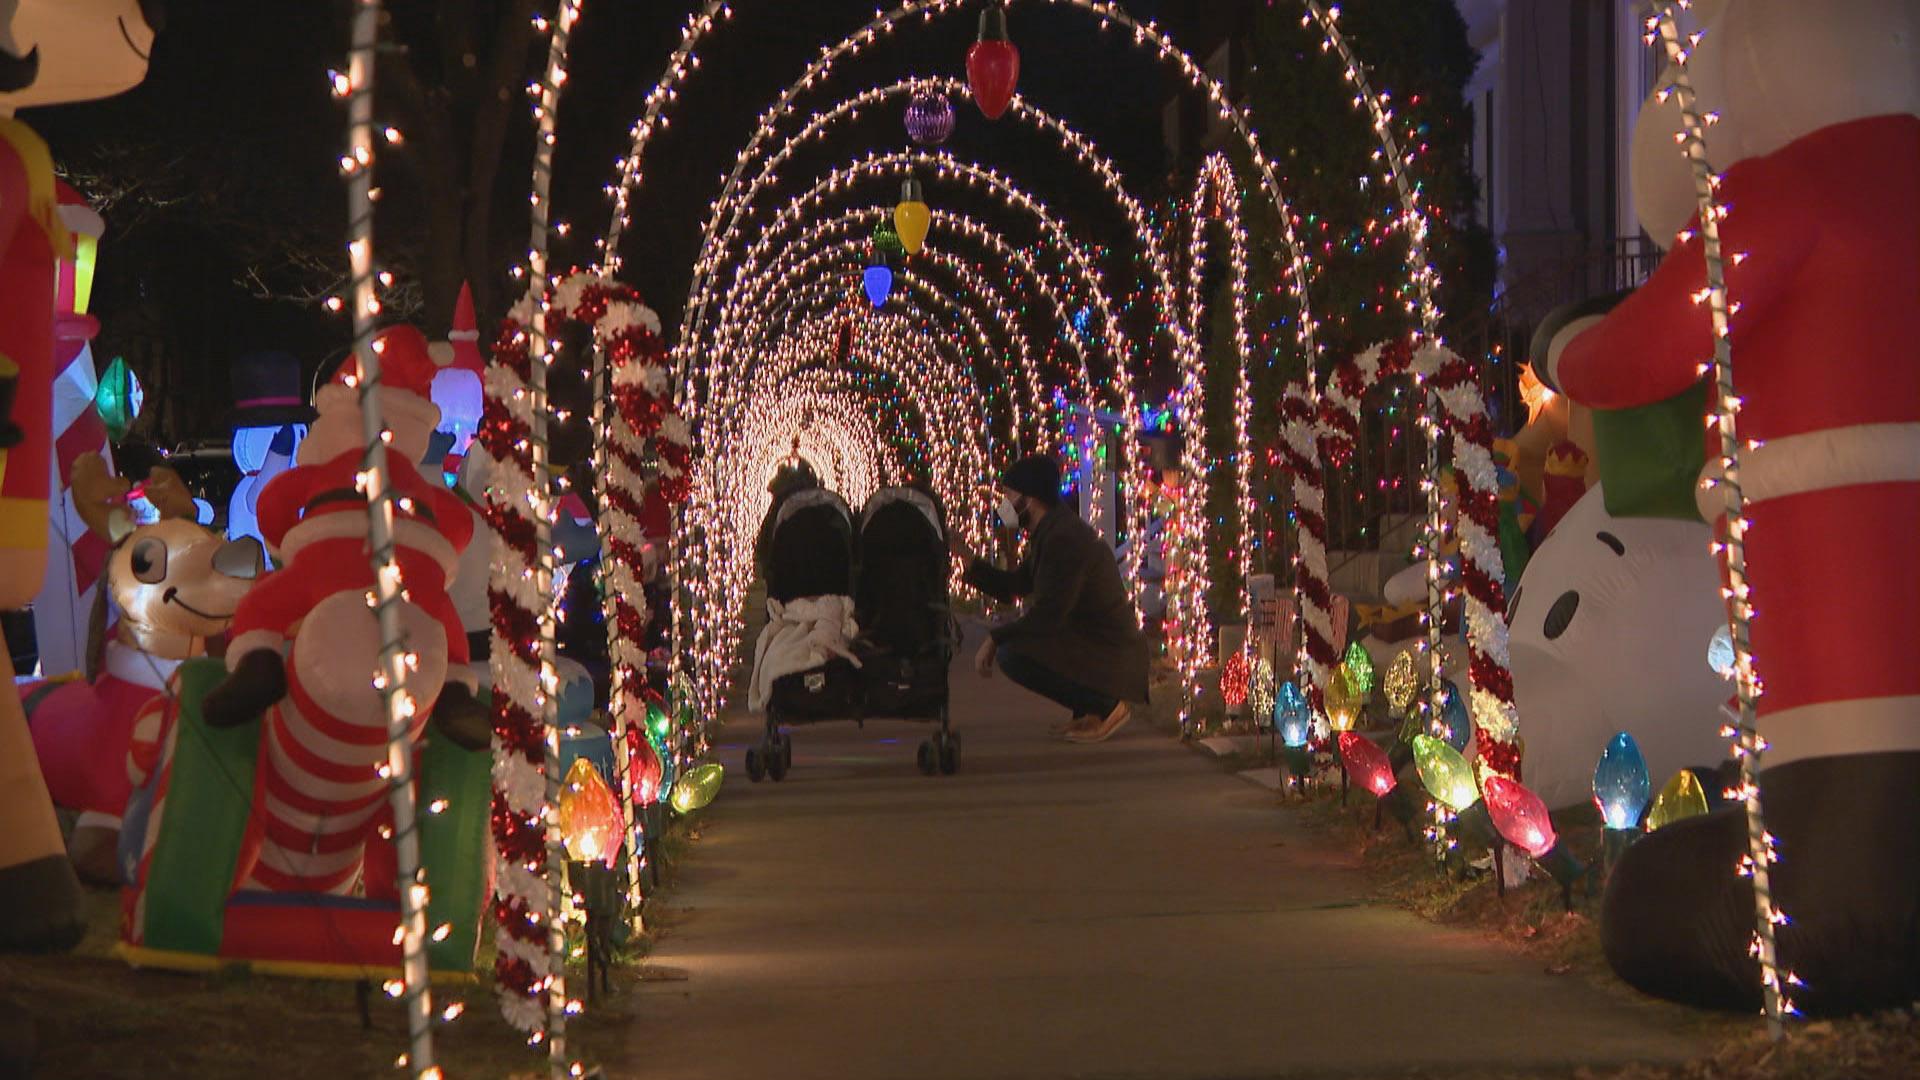 A holiday lights display on Francisco Avenue in Chicago. Public health officials urged residents across the state to avoid travel and large gatherings this holiday season to curb the spread of COVID-19. (WTTW News)